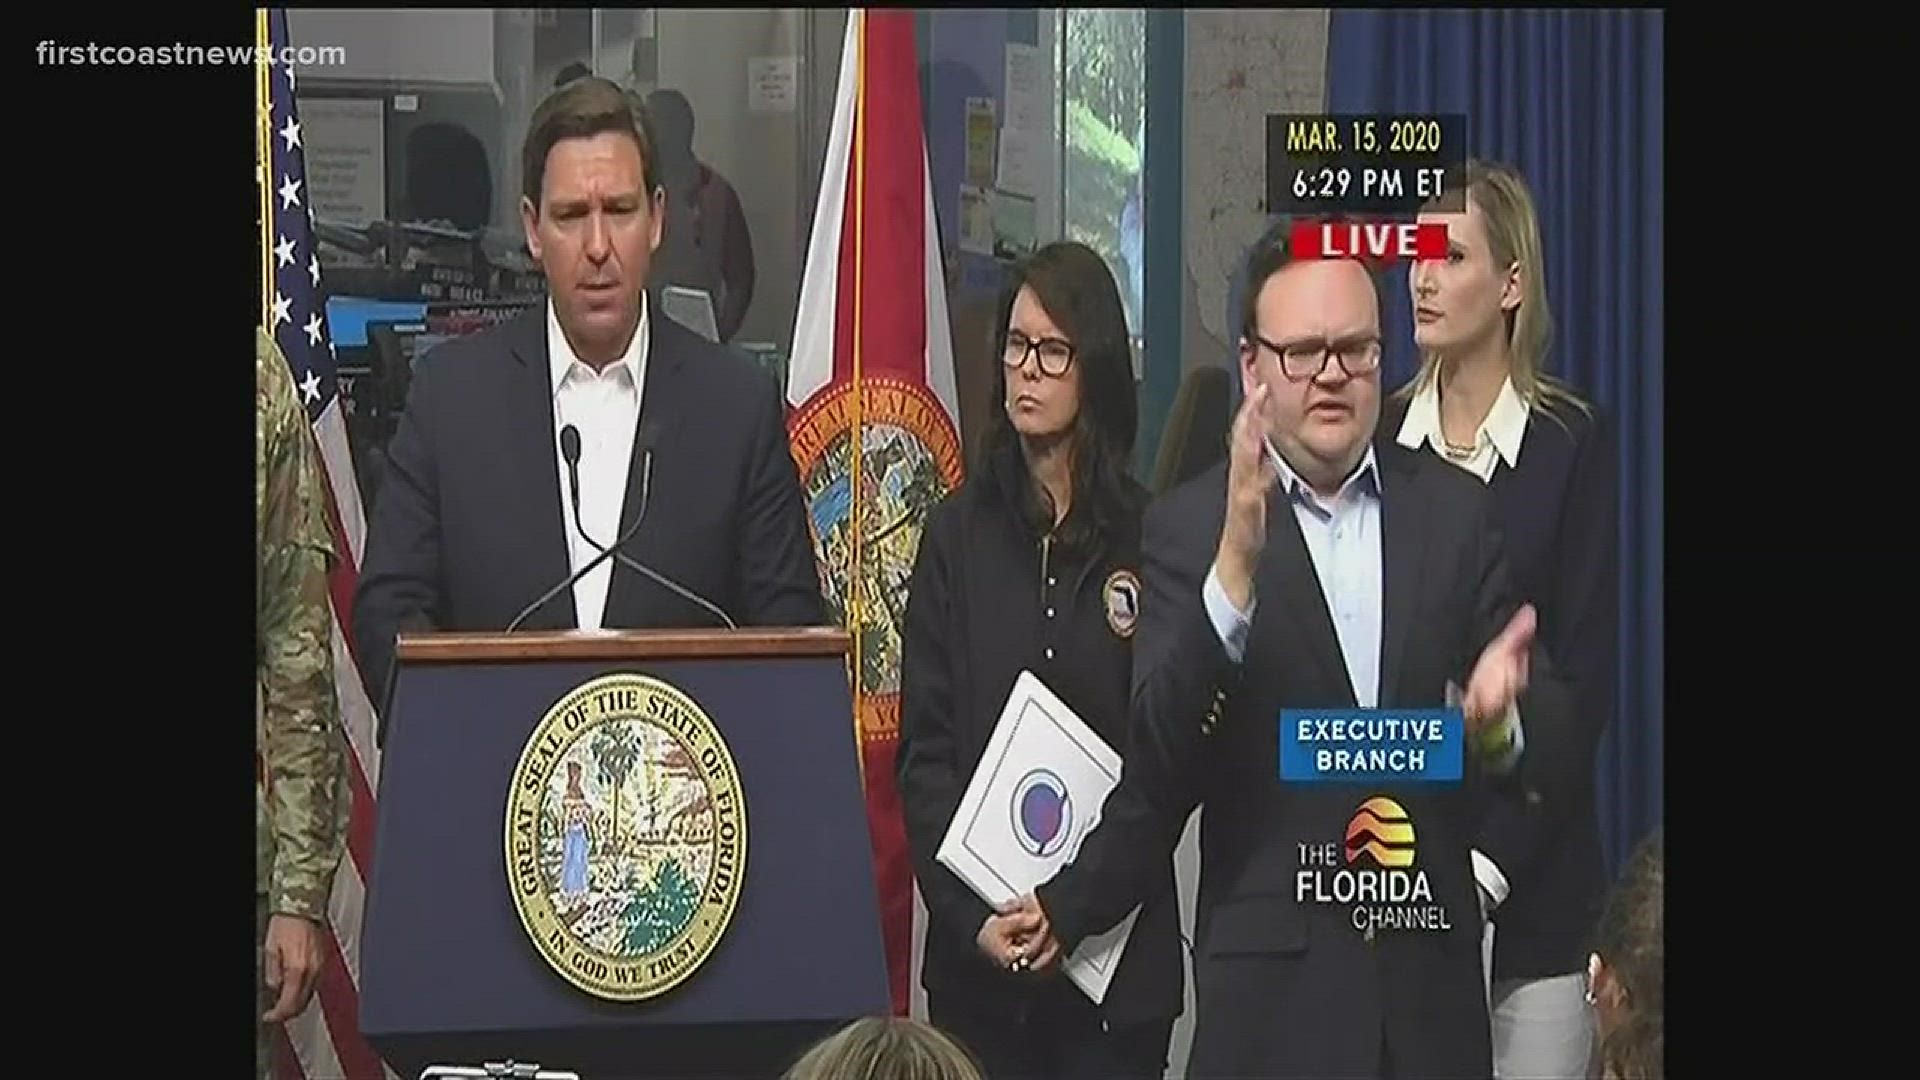 Fla. Gov. Ron DeSantis says large Spring Break events in South Florida "undercut" state's effort to stem the spread of COVID-19.